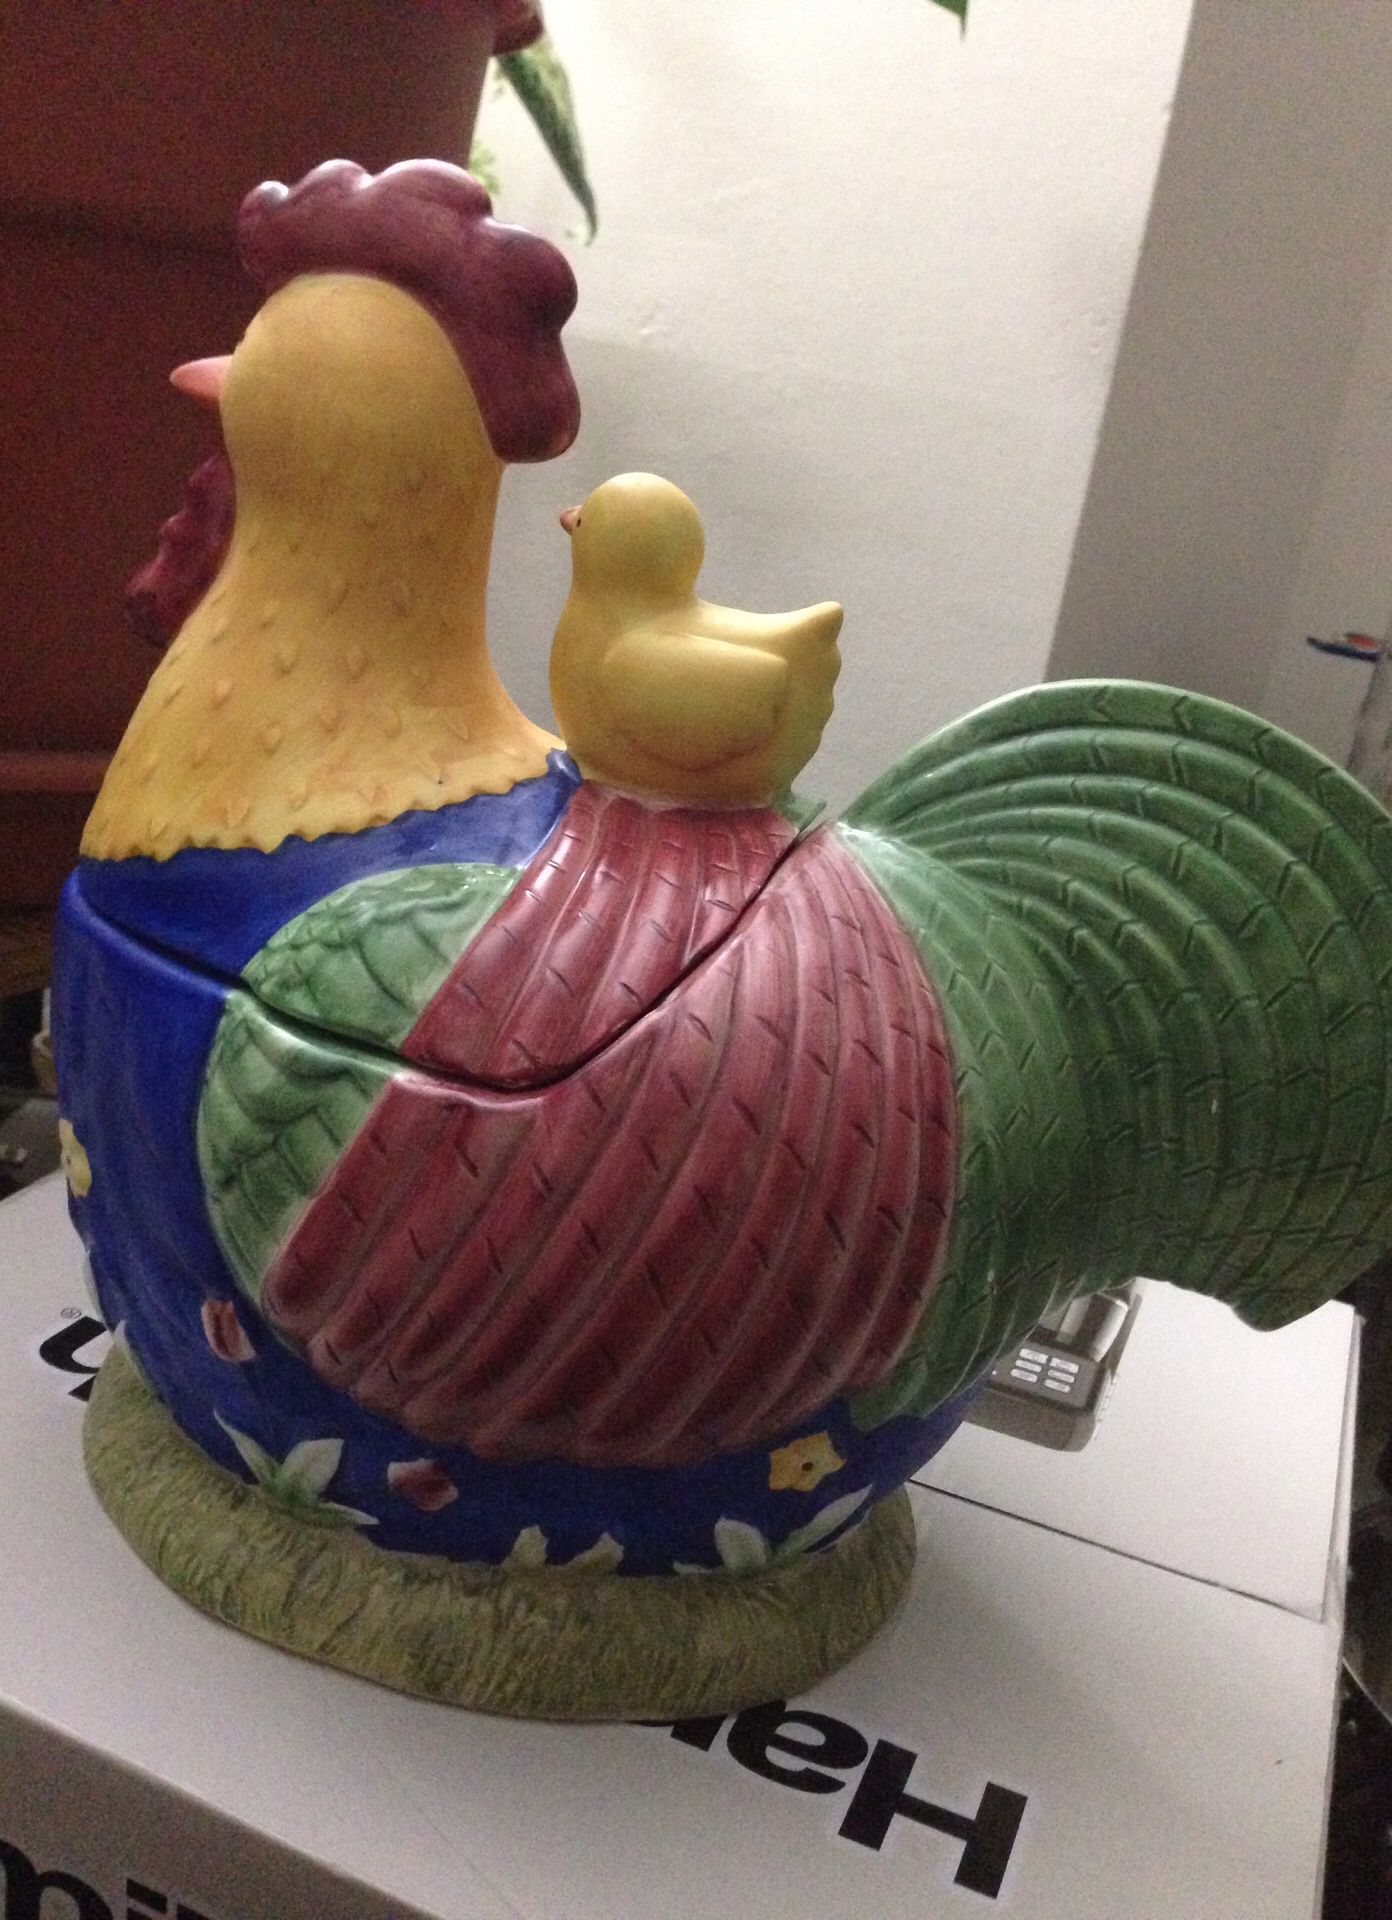 Chicken Cookie Jar By Coco Dowley. Brand Name is (CIC) Certified International Corporation. Please See All The Pictures and Read the description